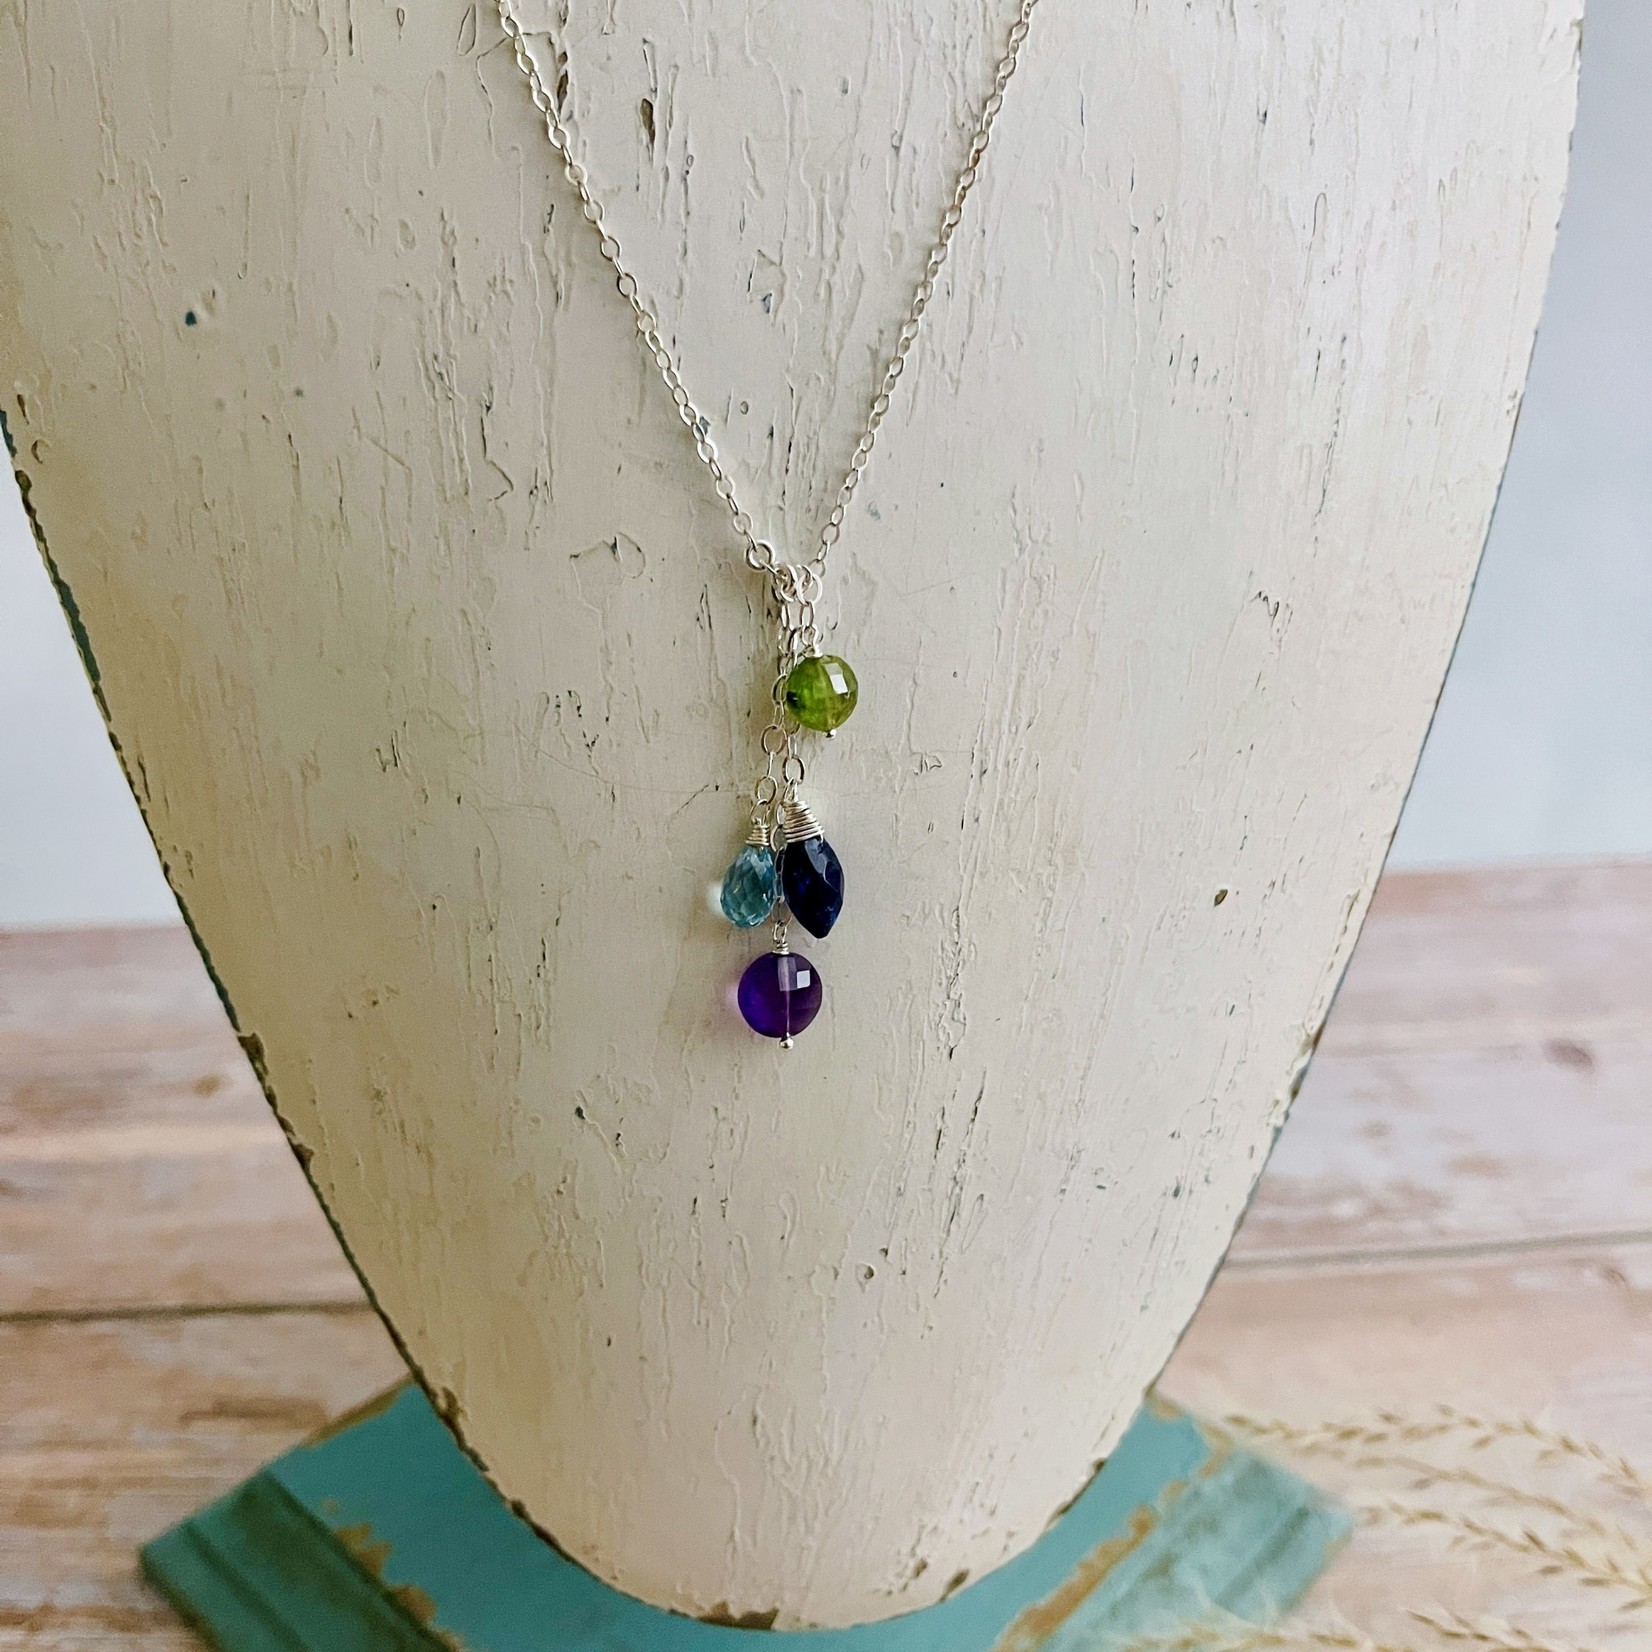 Handmade Necklace with green garnet coin, amethyst coin, kyanite marquise briolette, sky blue topaz blue topaz blue topaz briolette 2 chains